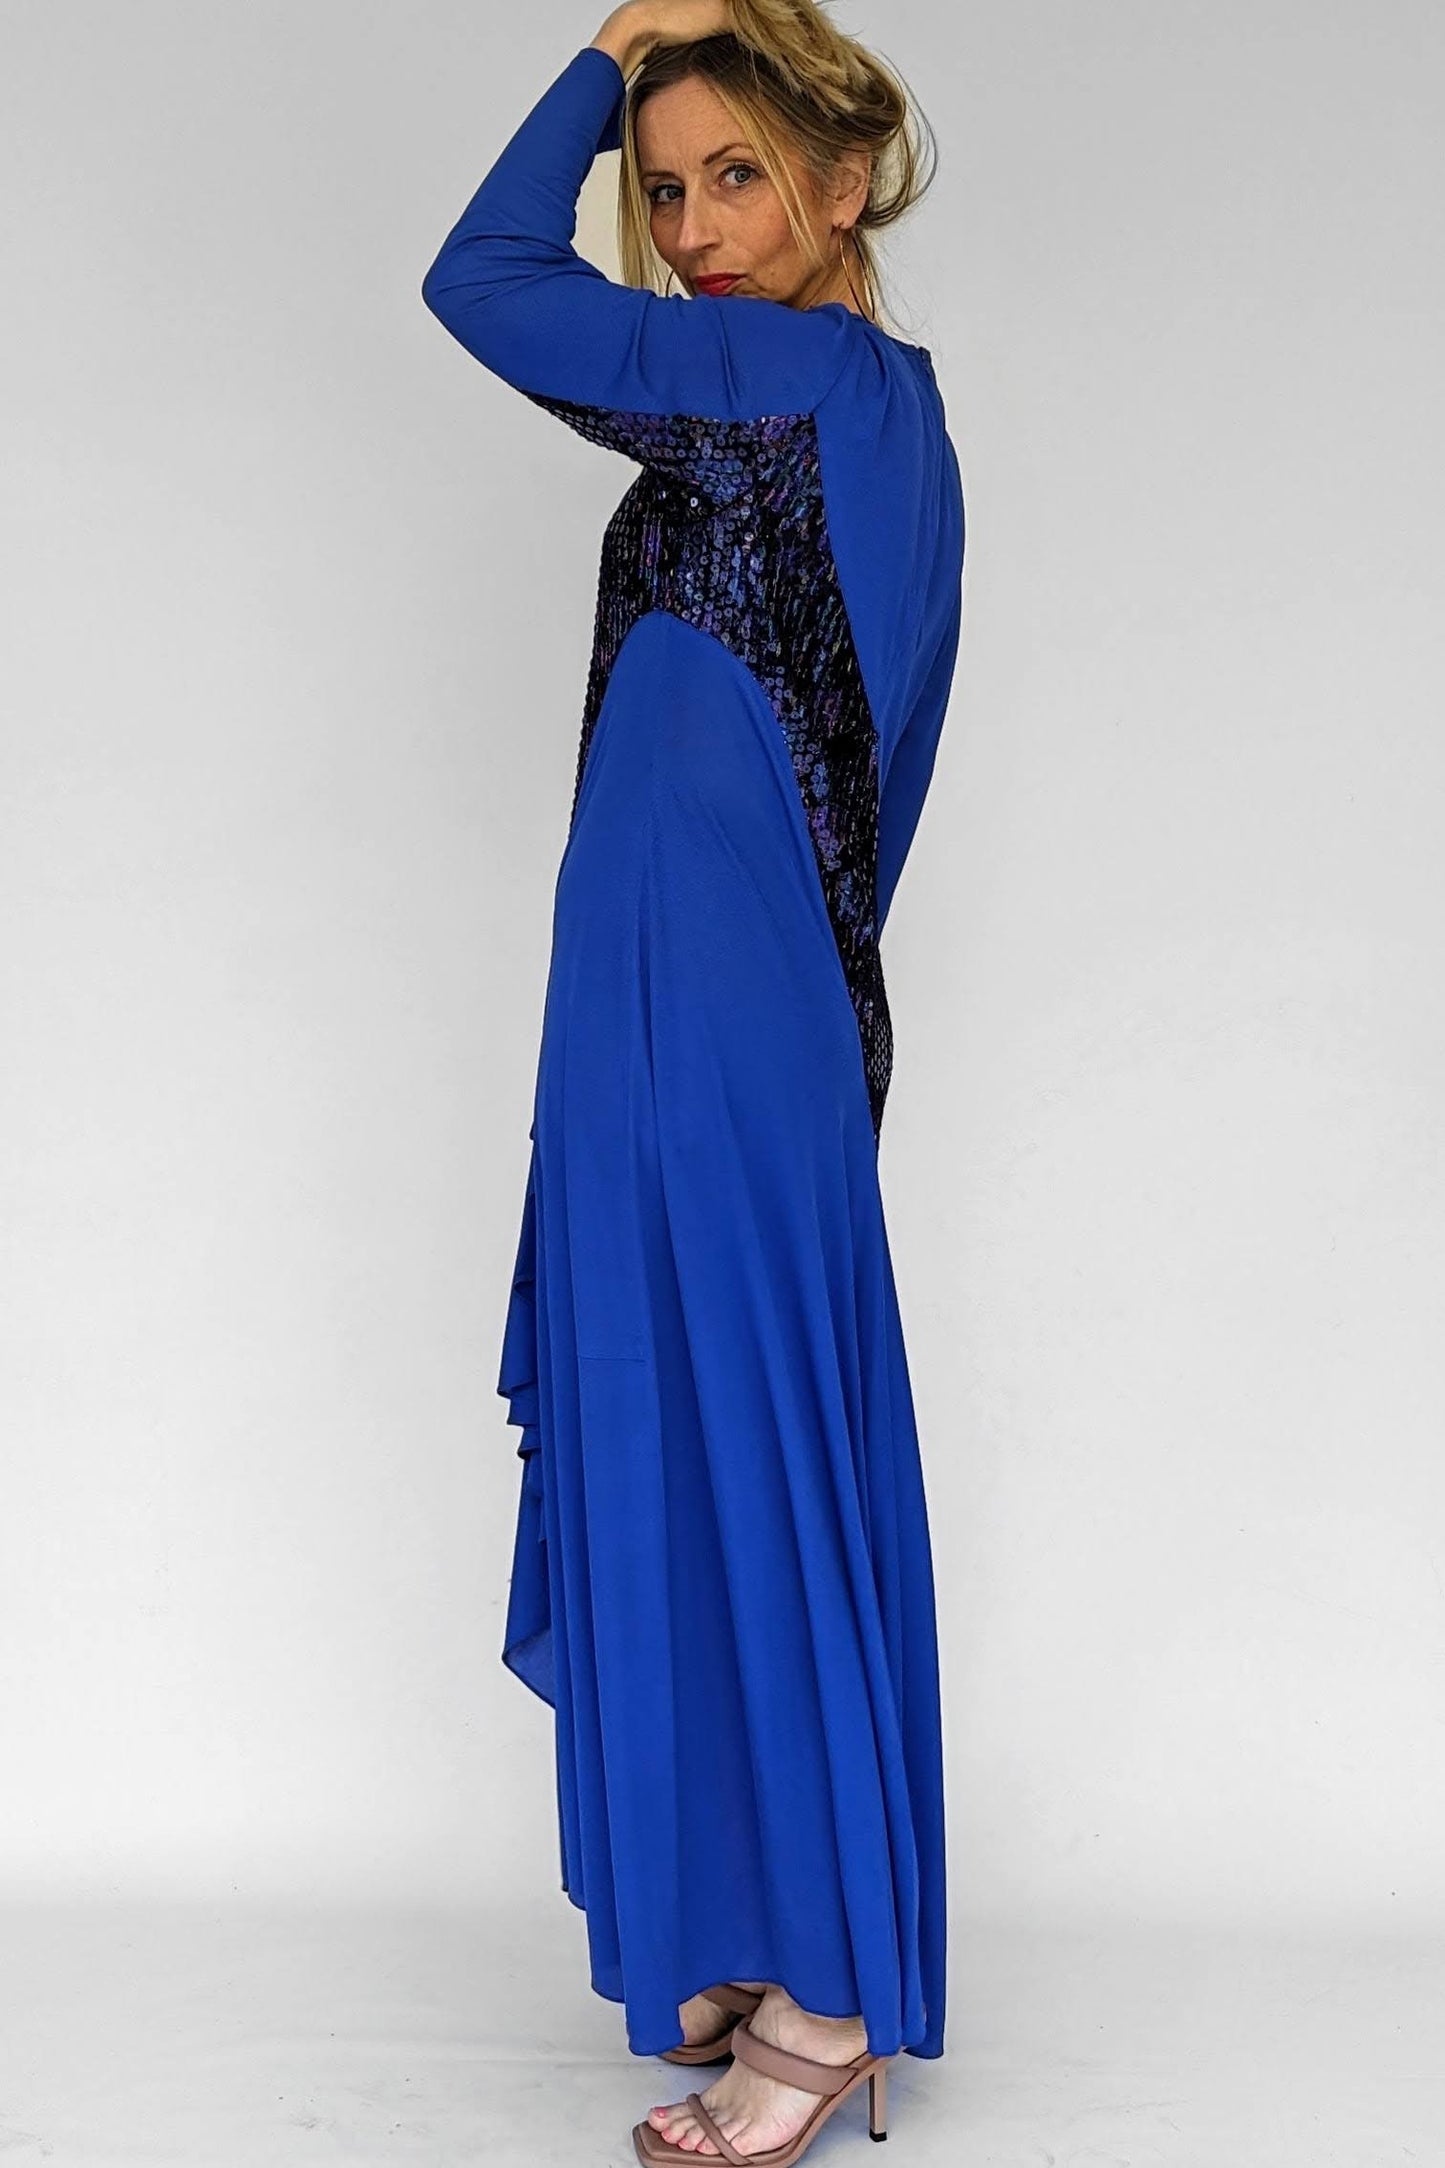 Blue 80s Evening Gown